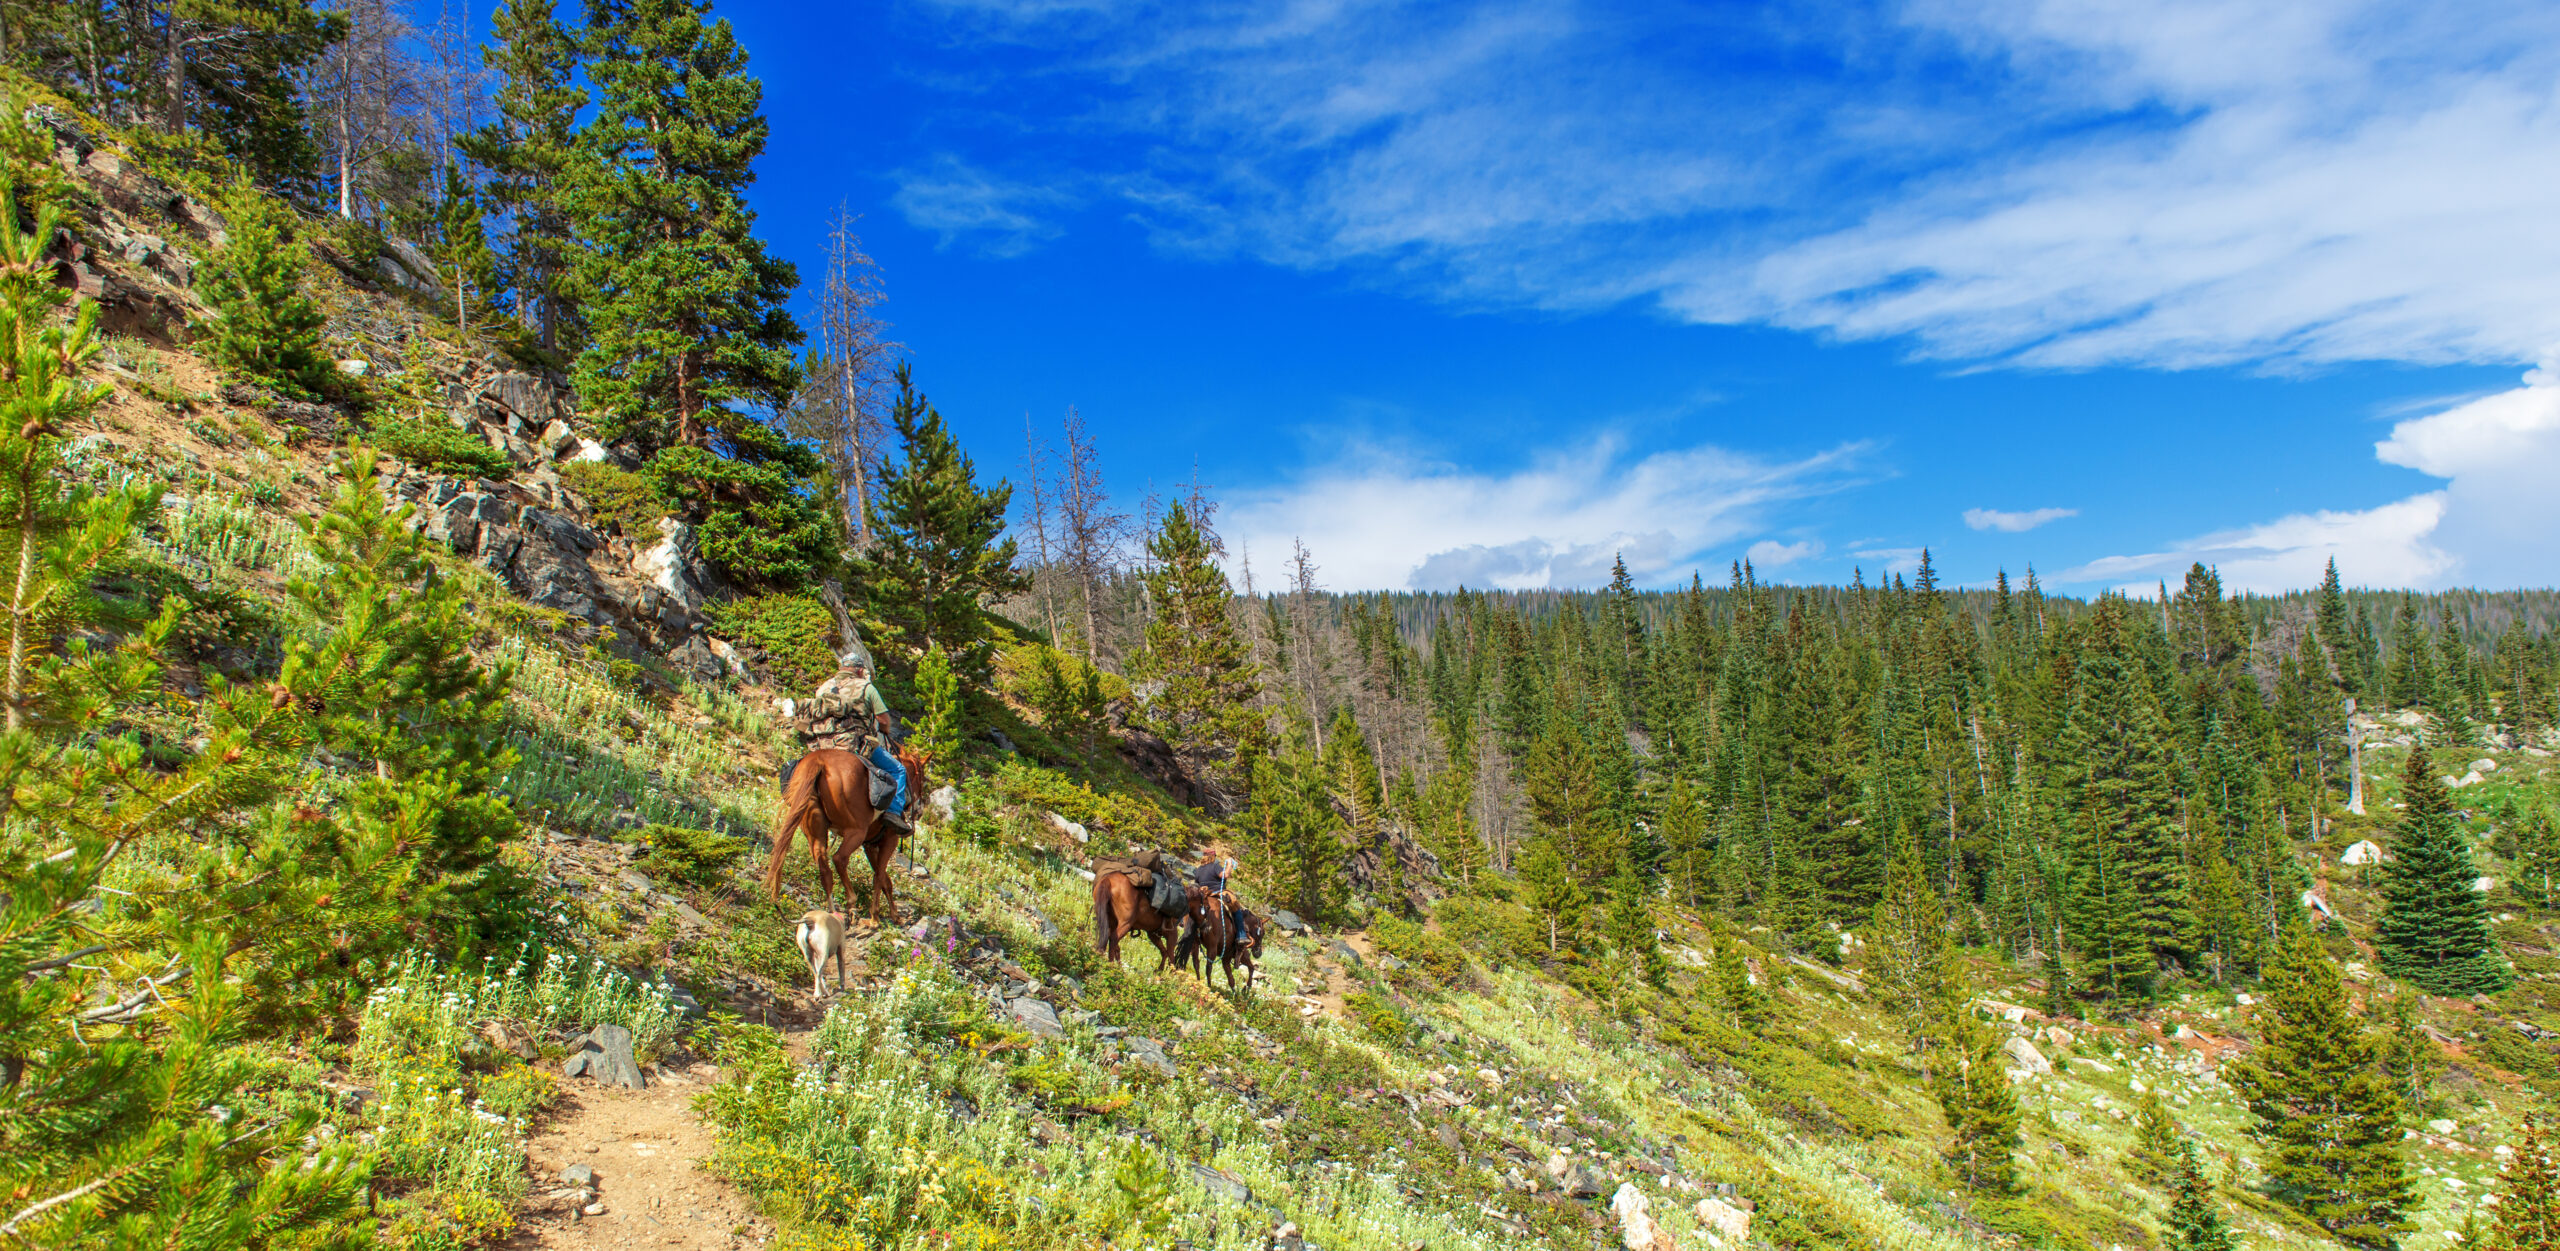 5 things to take on a backcountry trail ride